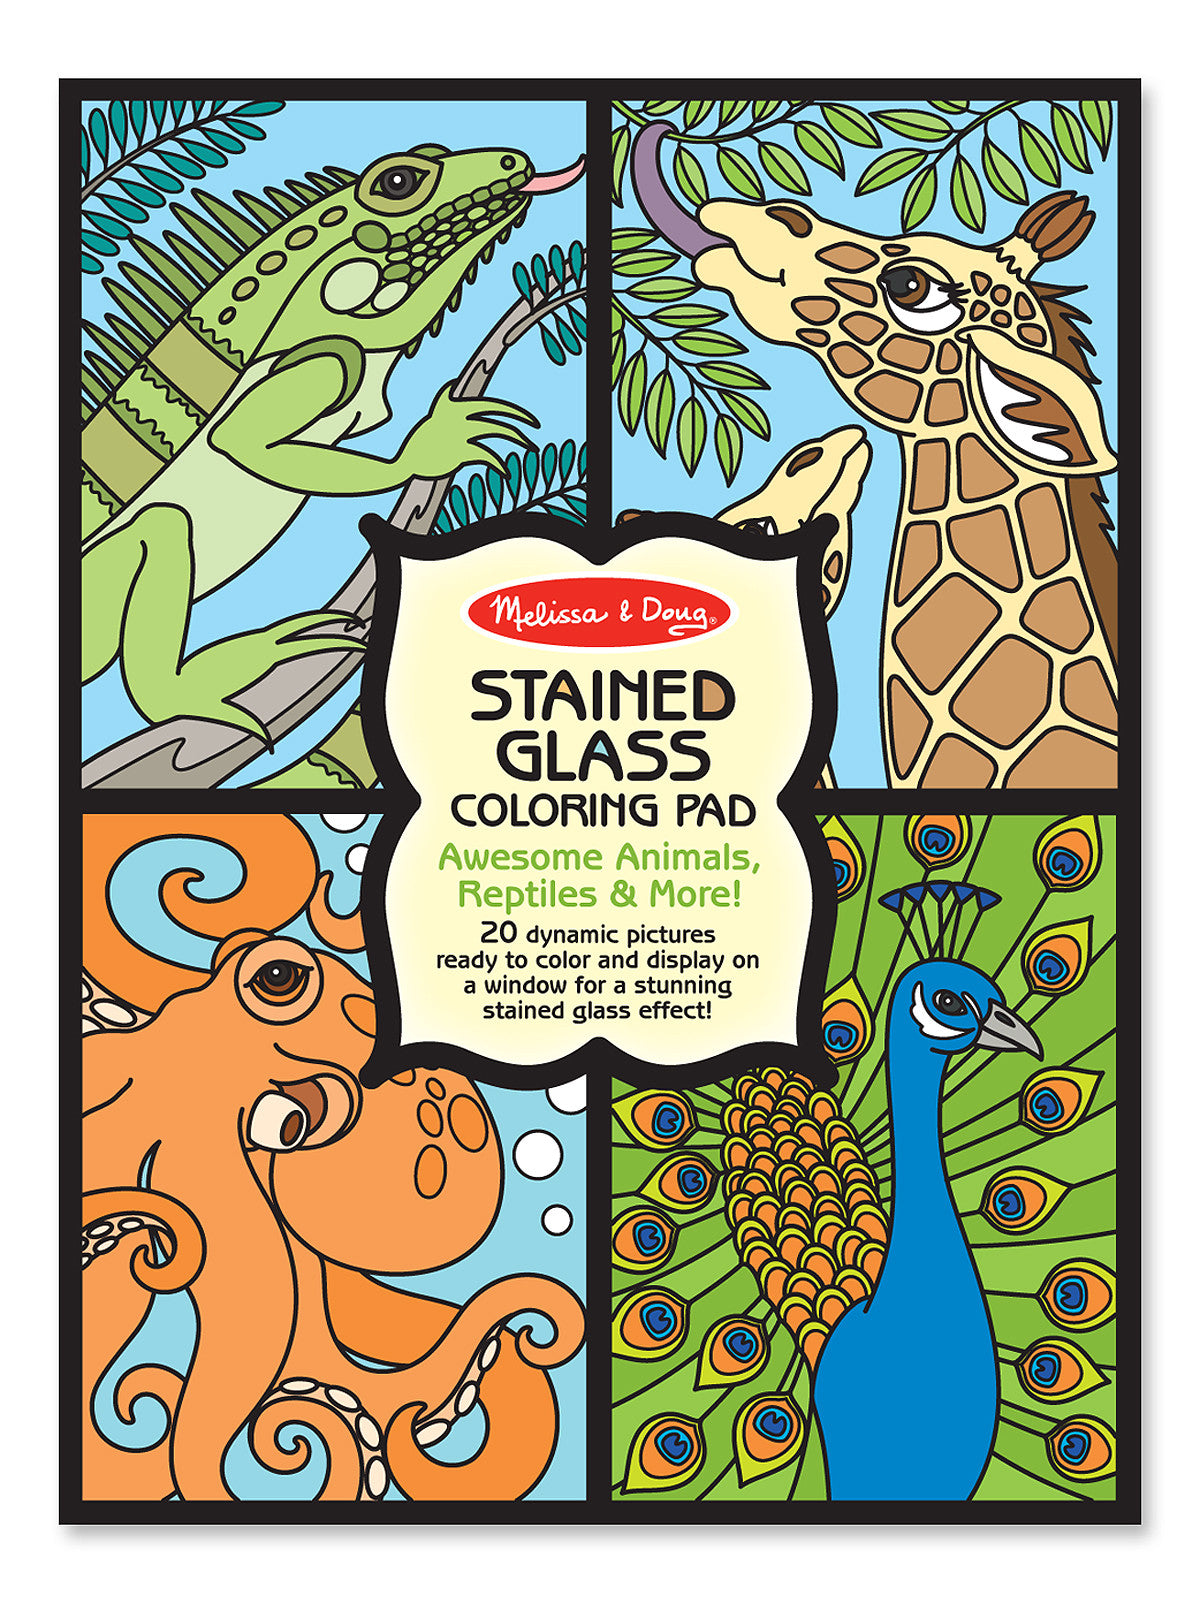 Melissa & Doug Stained Glass Coloring Pad - Animals